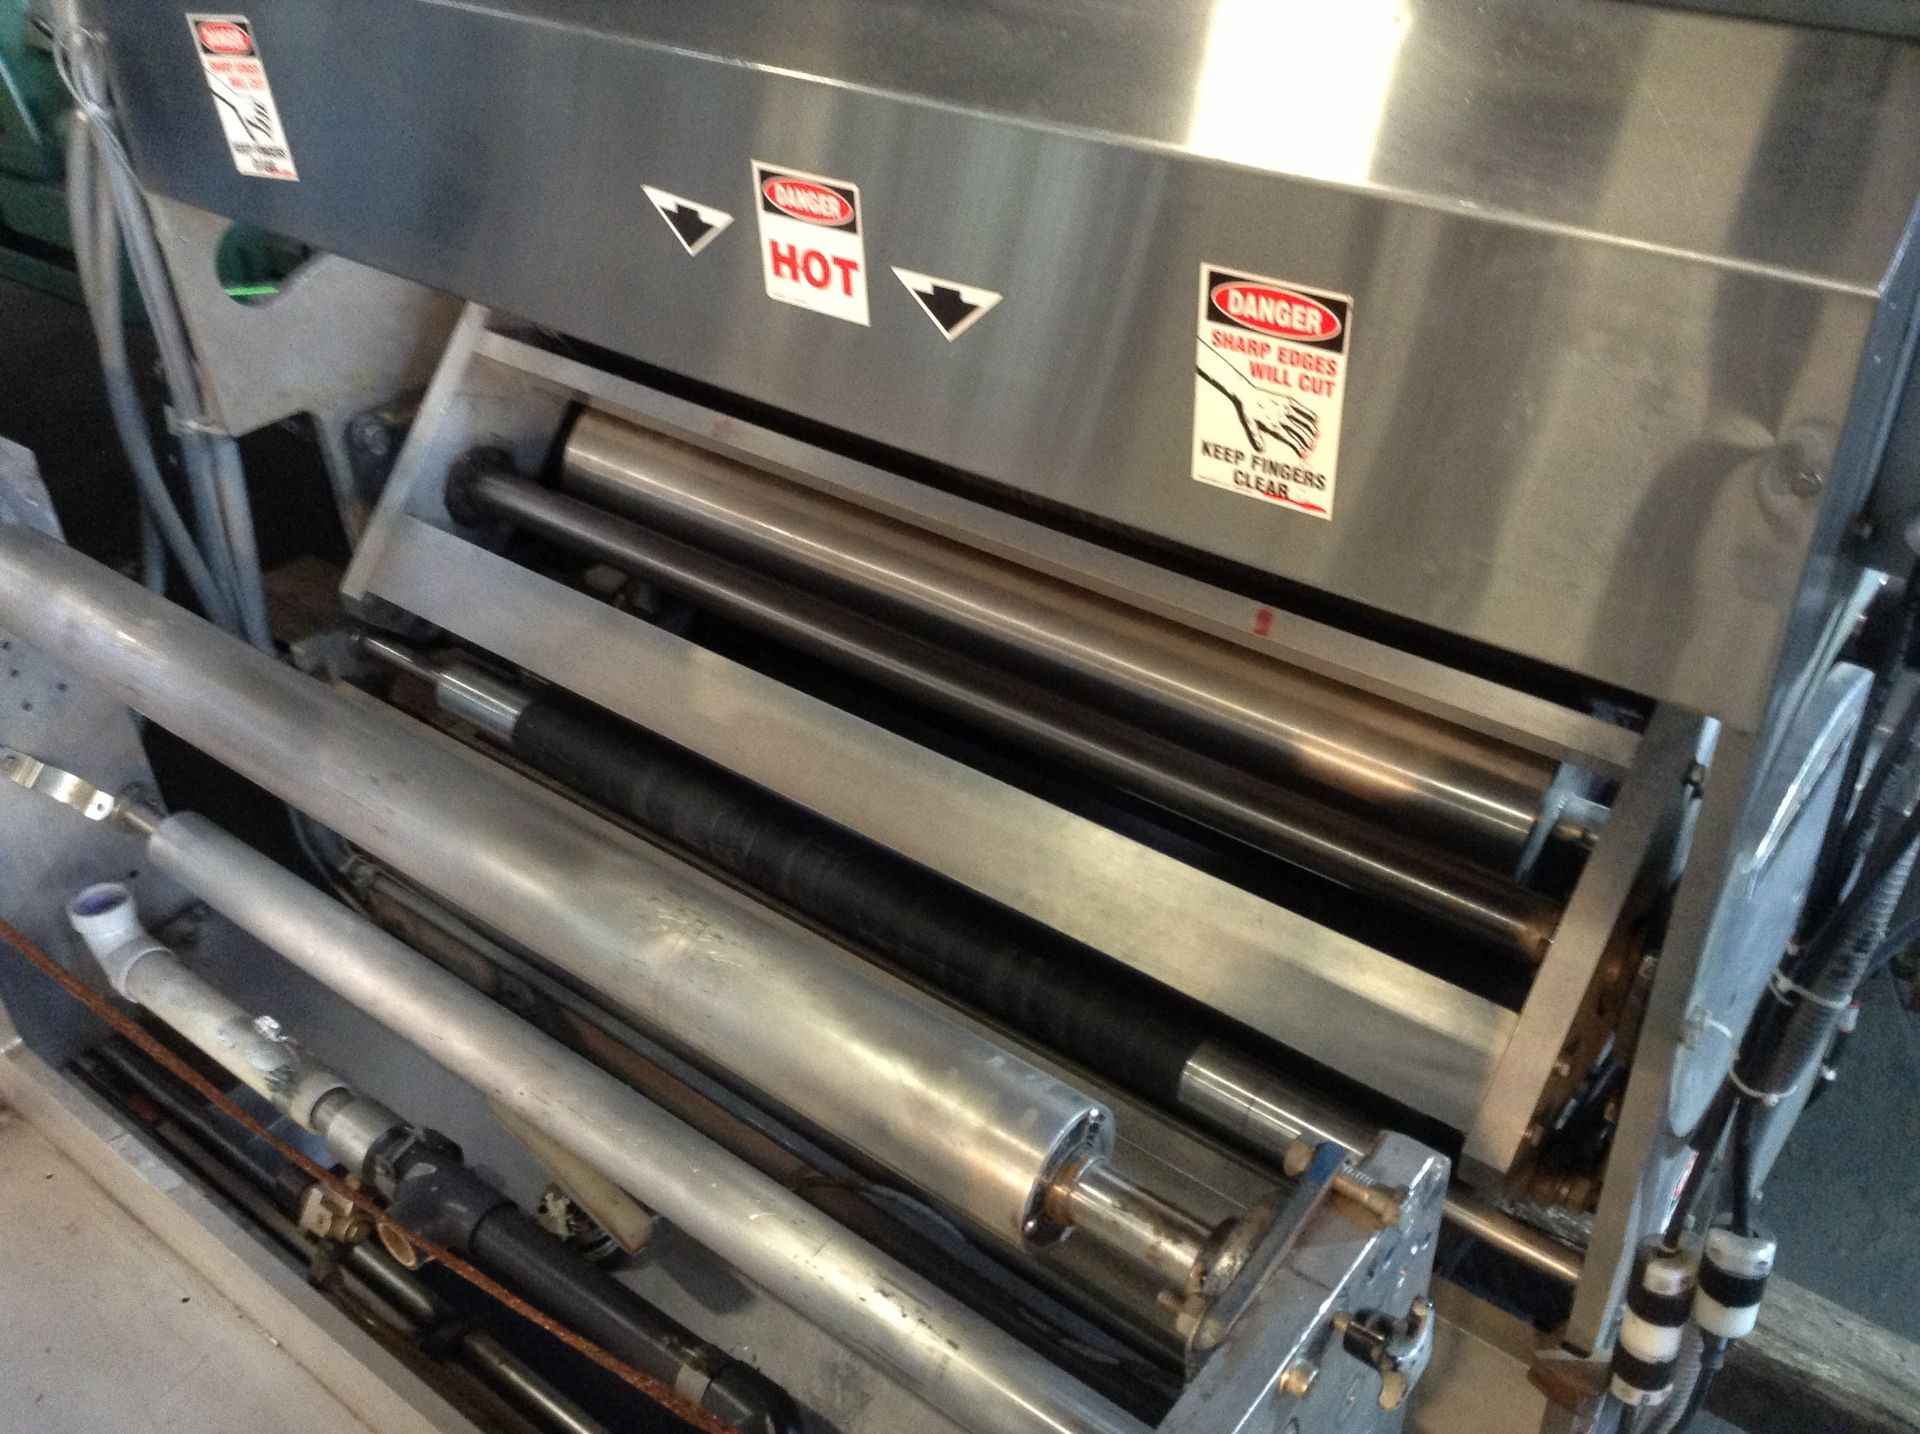 42” Redex laminator. 2-ply thermal lamination system. Age 1999. Model Thermo Lam 3. MAP Systems - Image 18 of 34